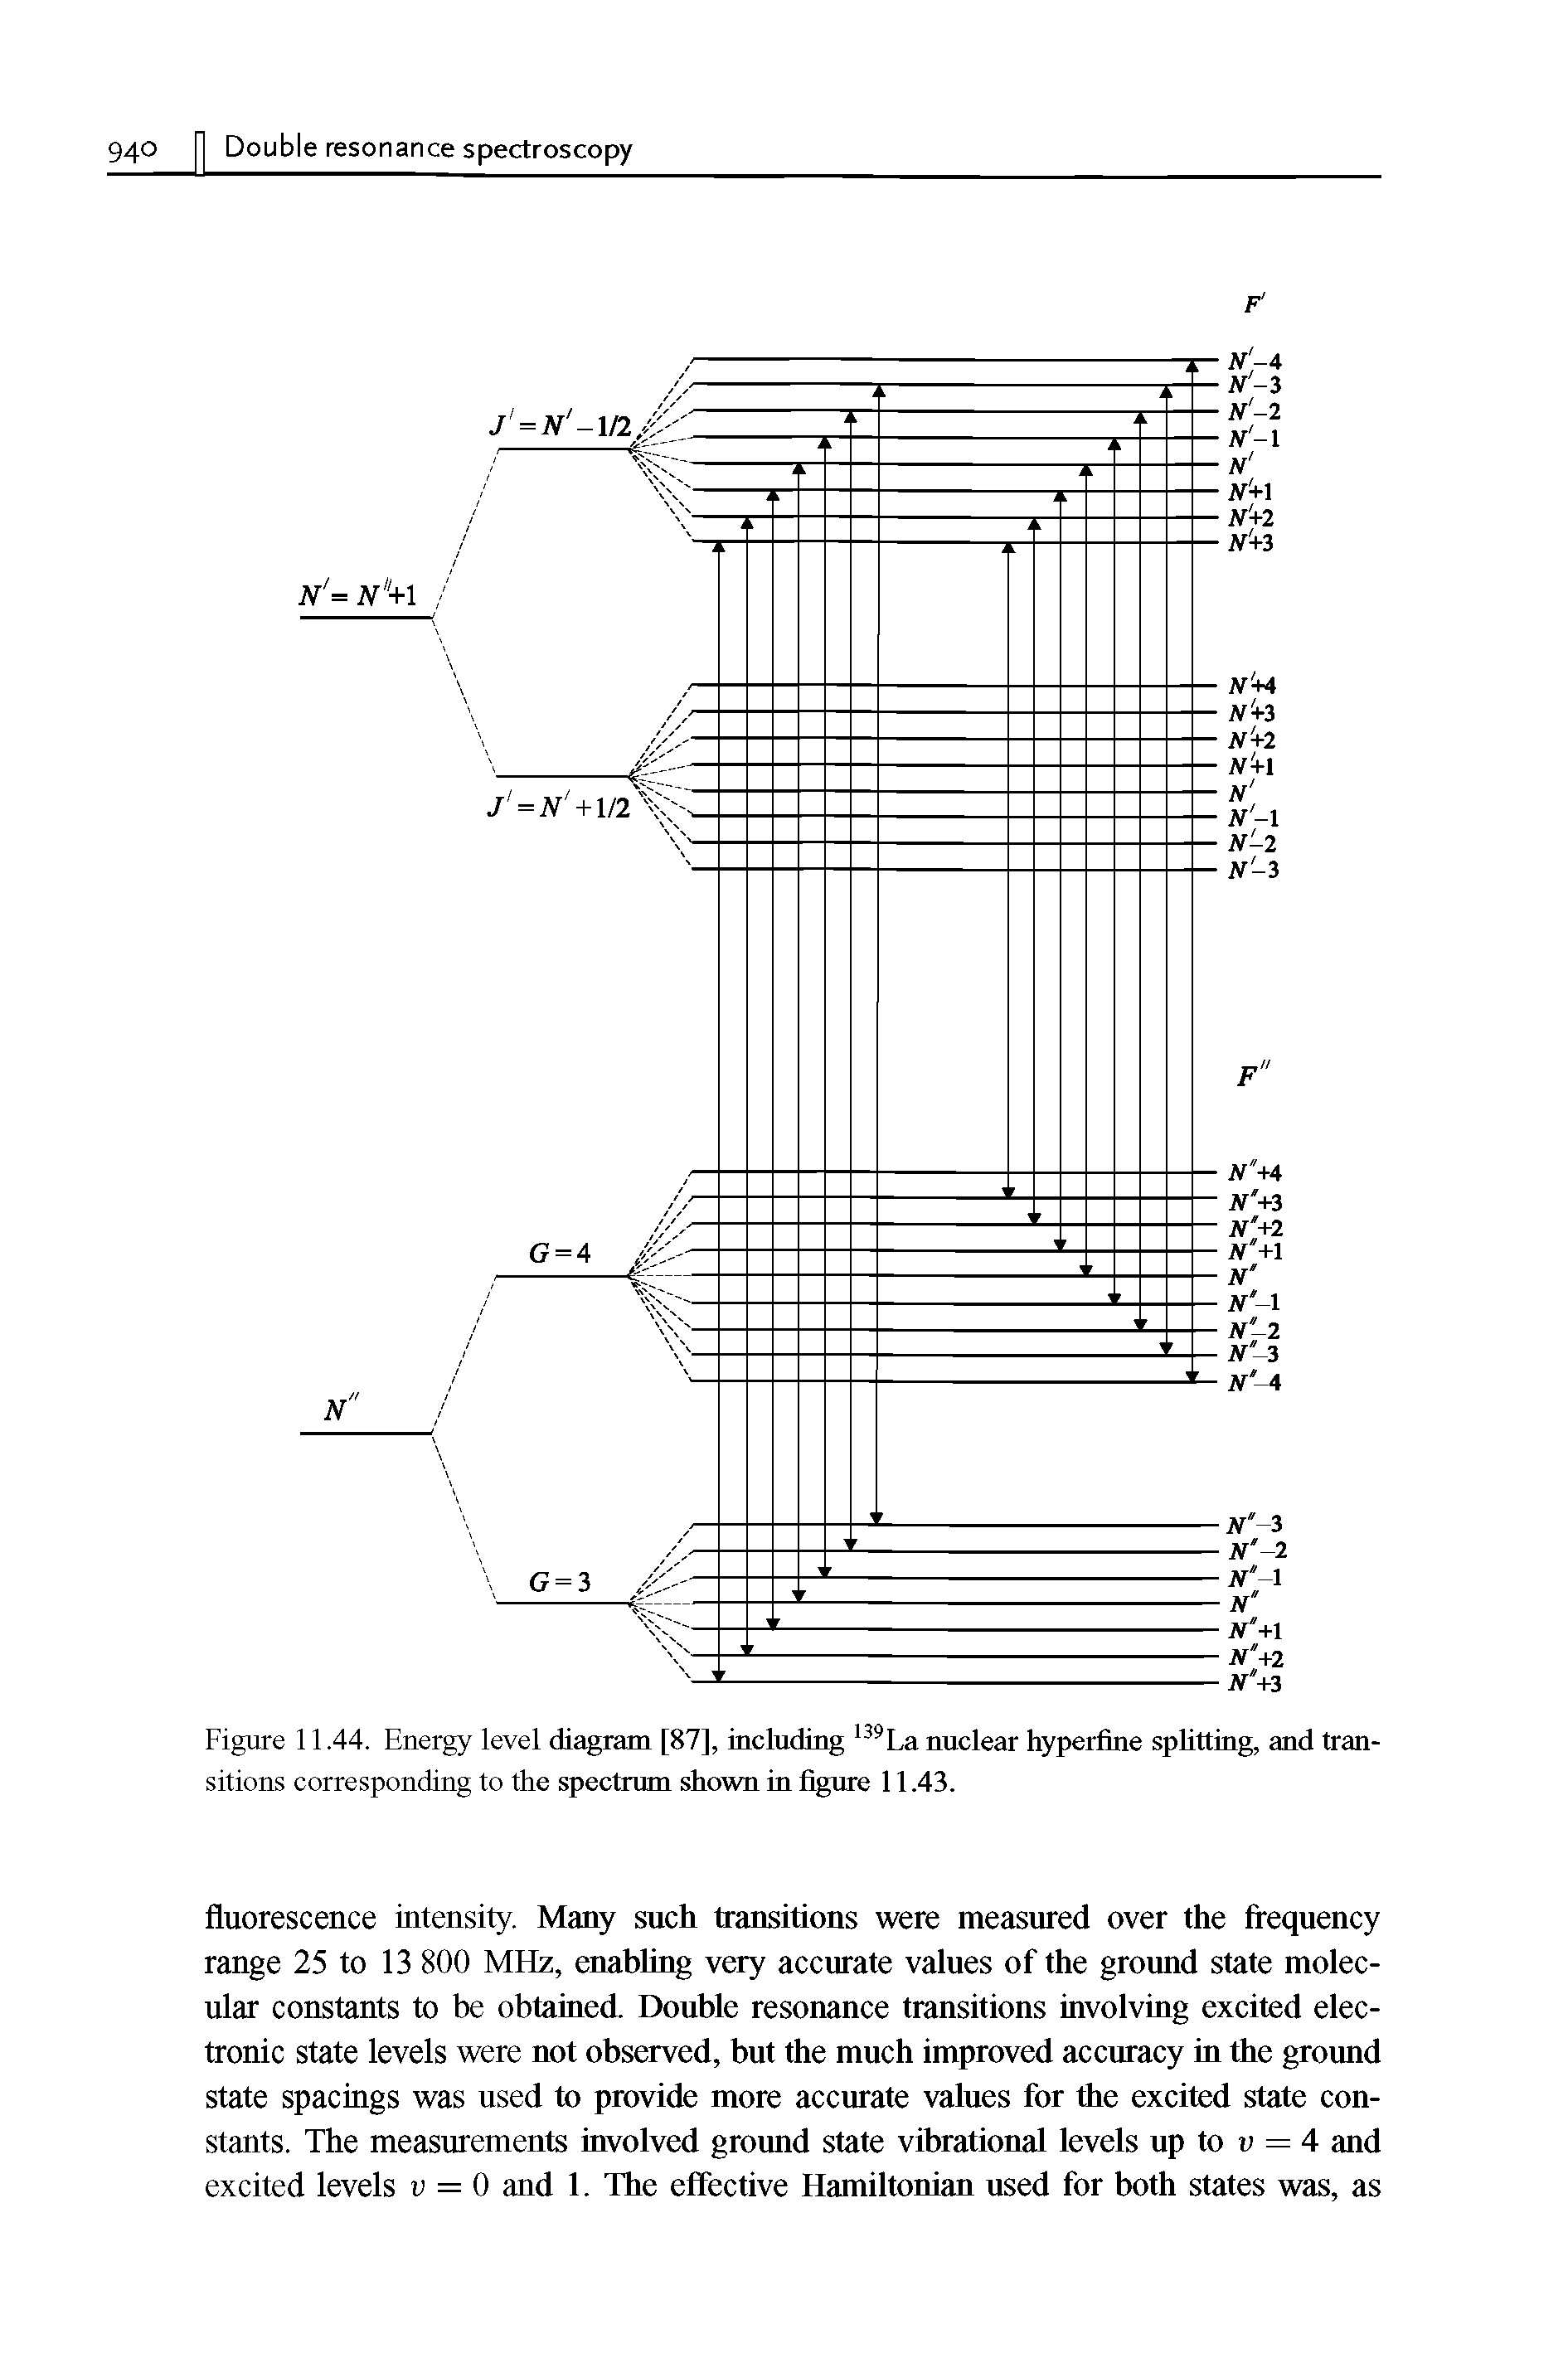 Figure 11.44. Energy level diagram [87], including 139La nuclear hyperfine splitting, and transitions corresponding to the spectrum shown in figure 11.43.